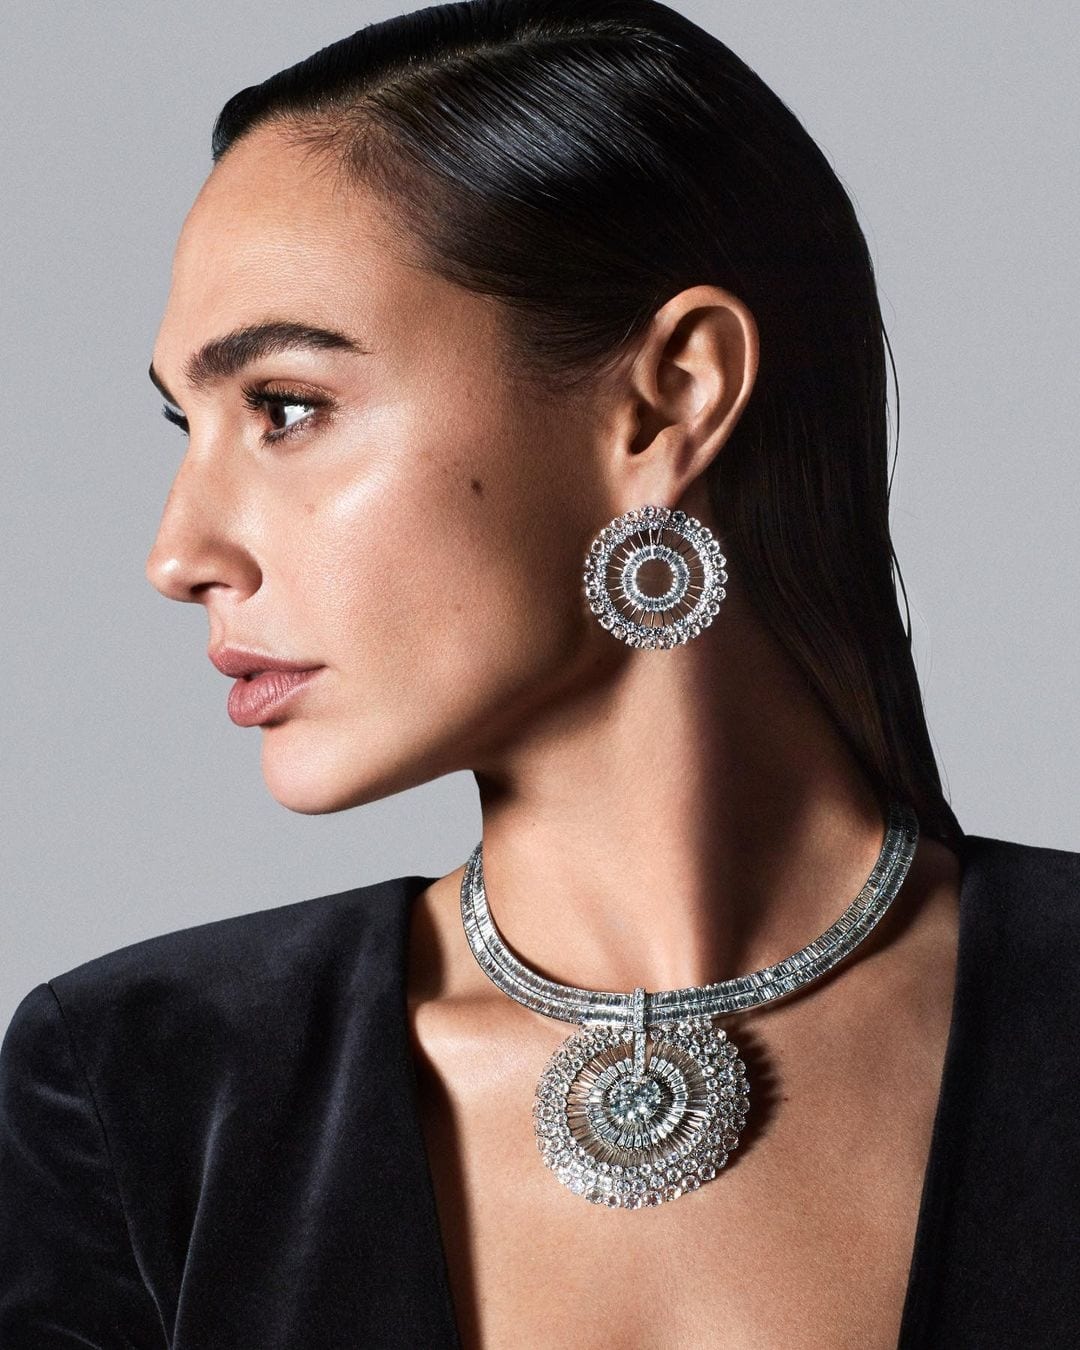 Gal Gadot is the latest famous face to star in a Tiffany & Co. jewelry campaign